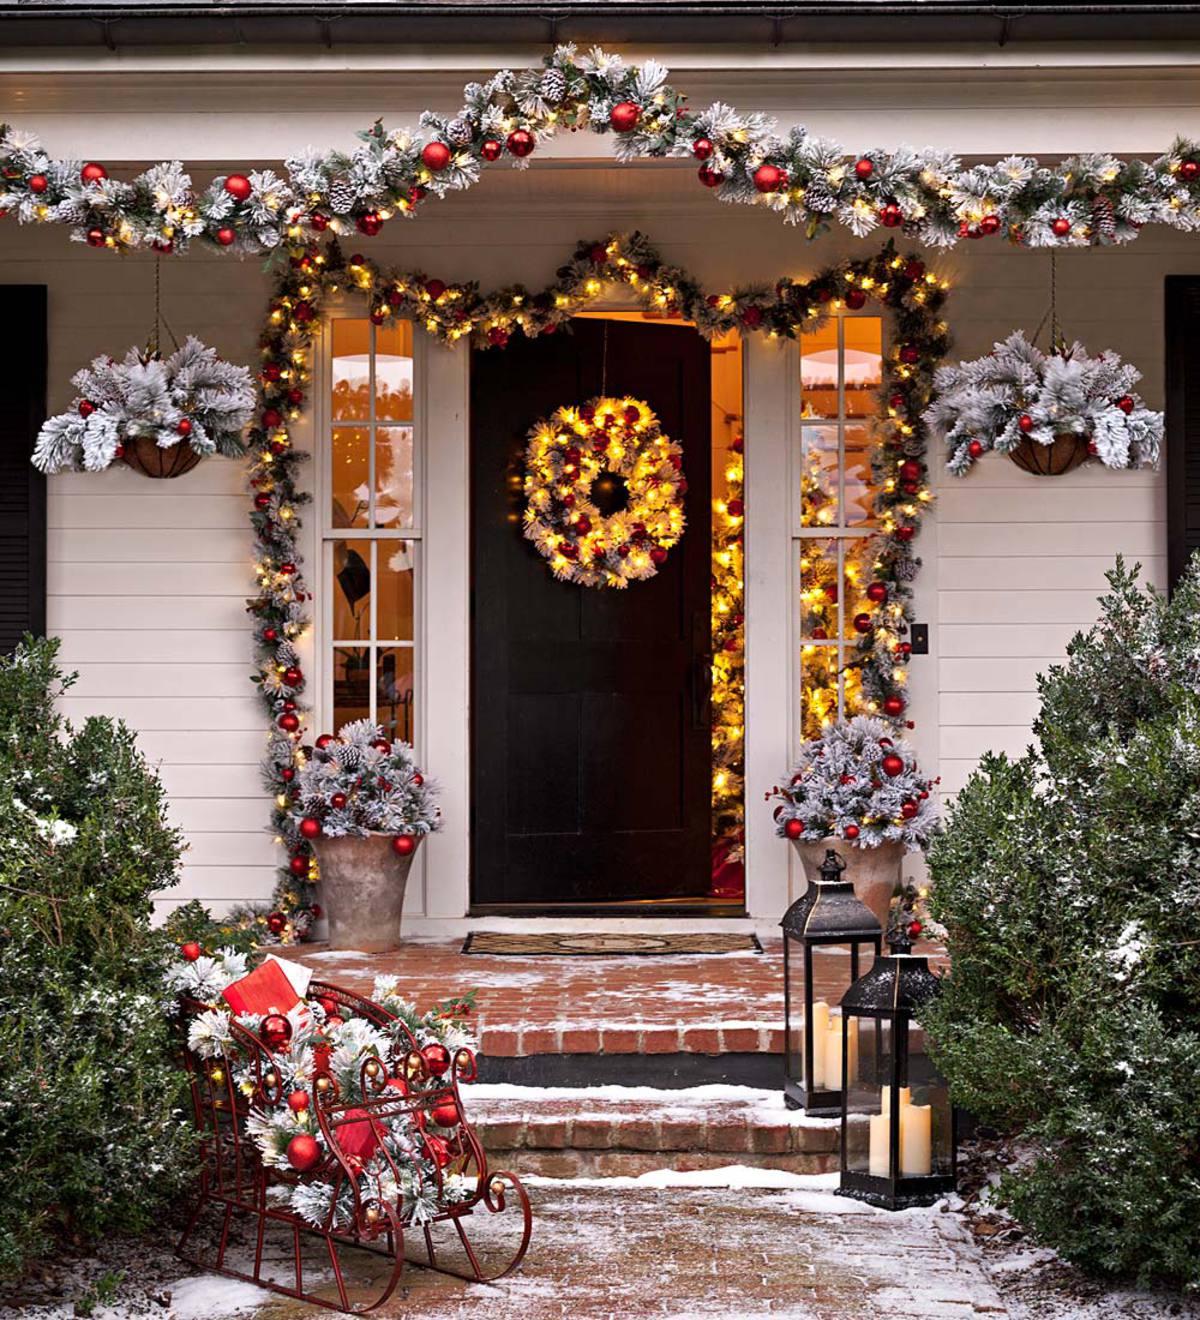 Fairfax Lighted Decorated Holiday Hanging Basket | Plow & Hearth